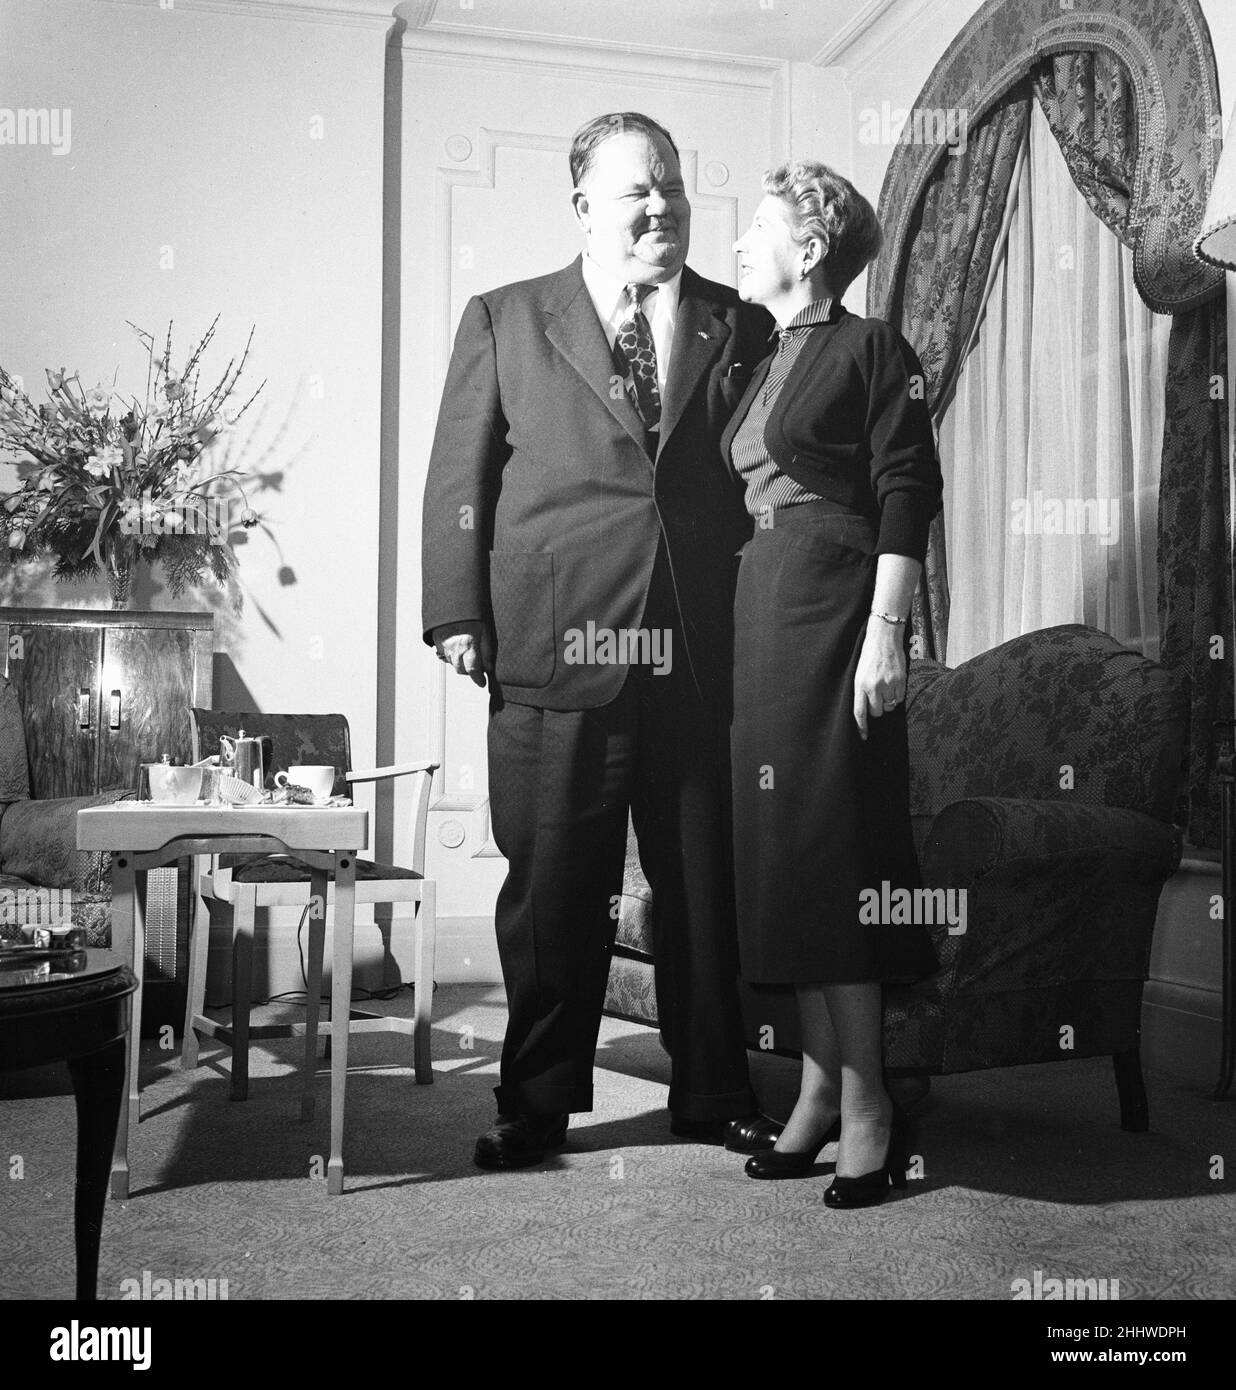 Stan Laurel and Oliver Hardy, arrived in the UK Monday (28th January), travelling on the RMS Queen Mary ocean liner, for a 10 week variety tour of British Music Halls, pictured London, Tuesday 29th January 1952.  Our Picture Shows ... Oliver Hardy and wife Virginia Lucille Jones. Stock Photo